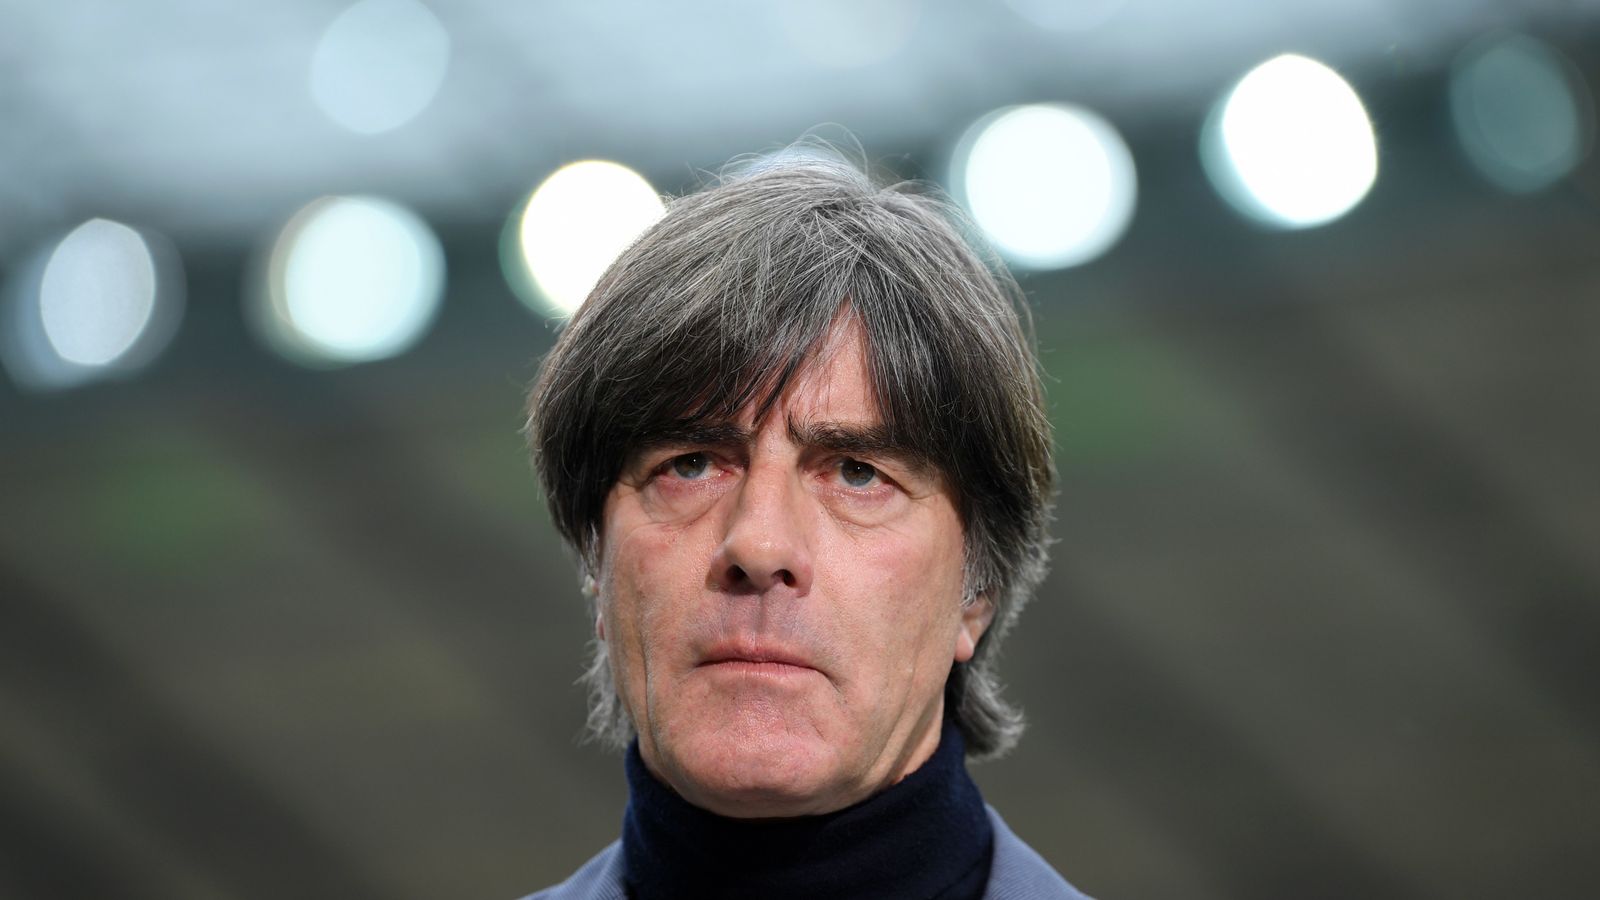 Germany Head Coach Joachim Low To Miss June Qualifiers For Euro 2020 With Squashed Artery